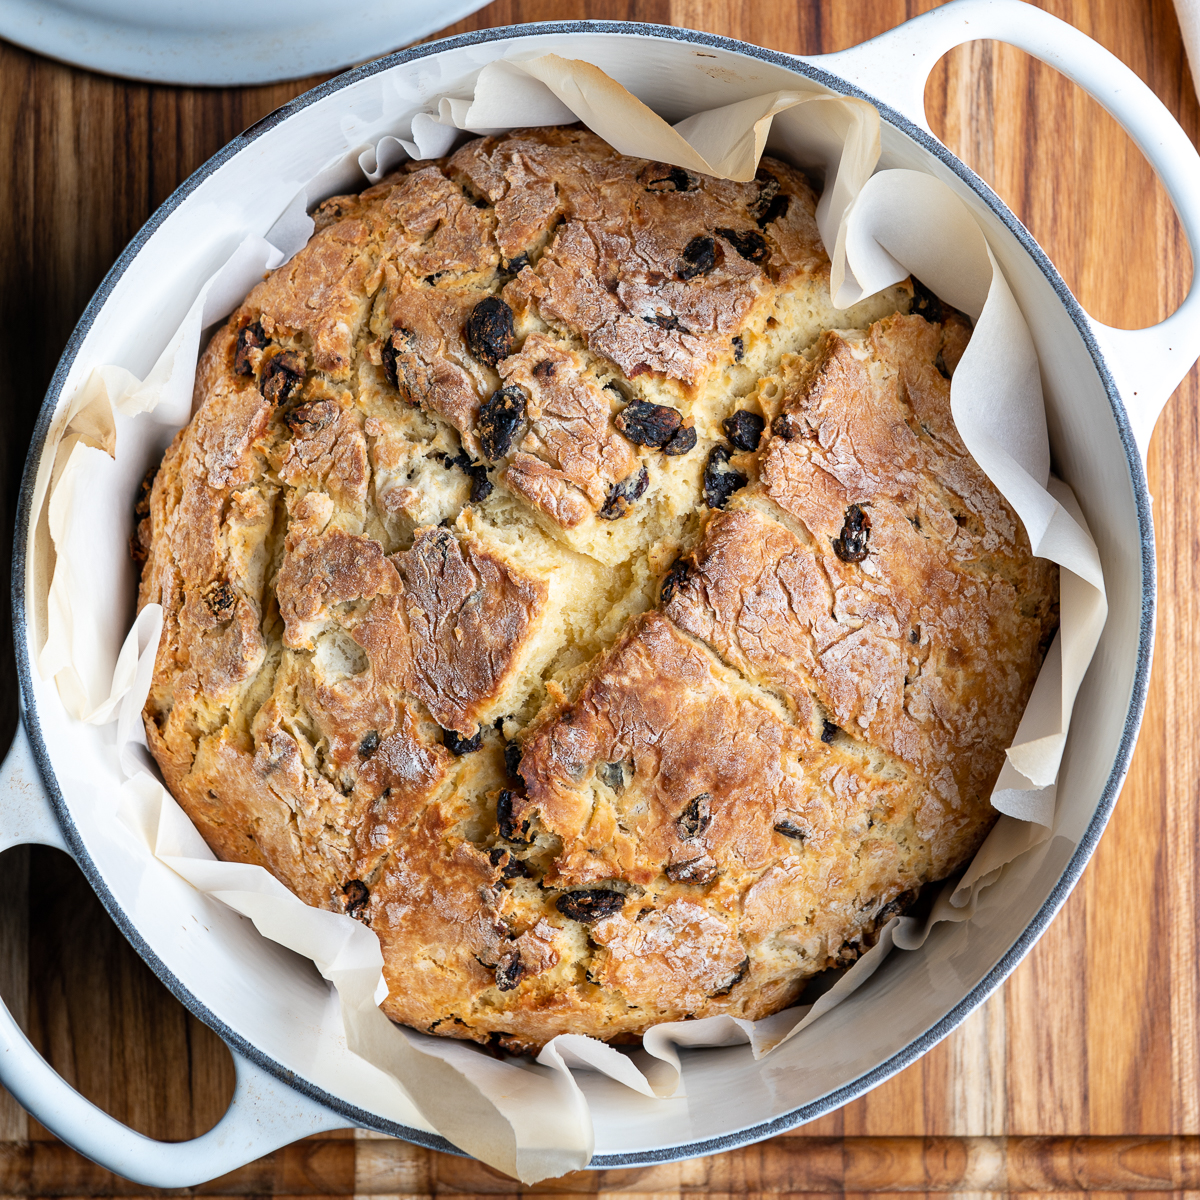 A loaf of Irish soda bread baked in a Dutch oven pot.